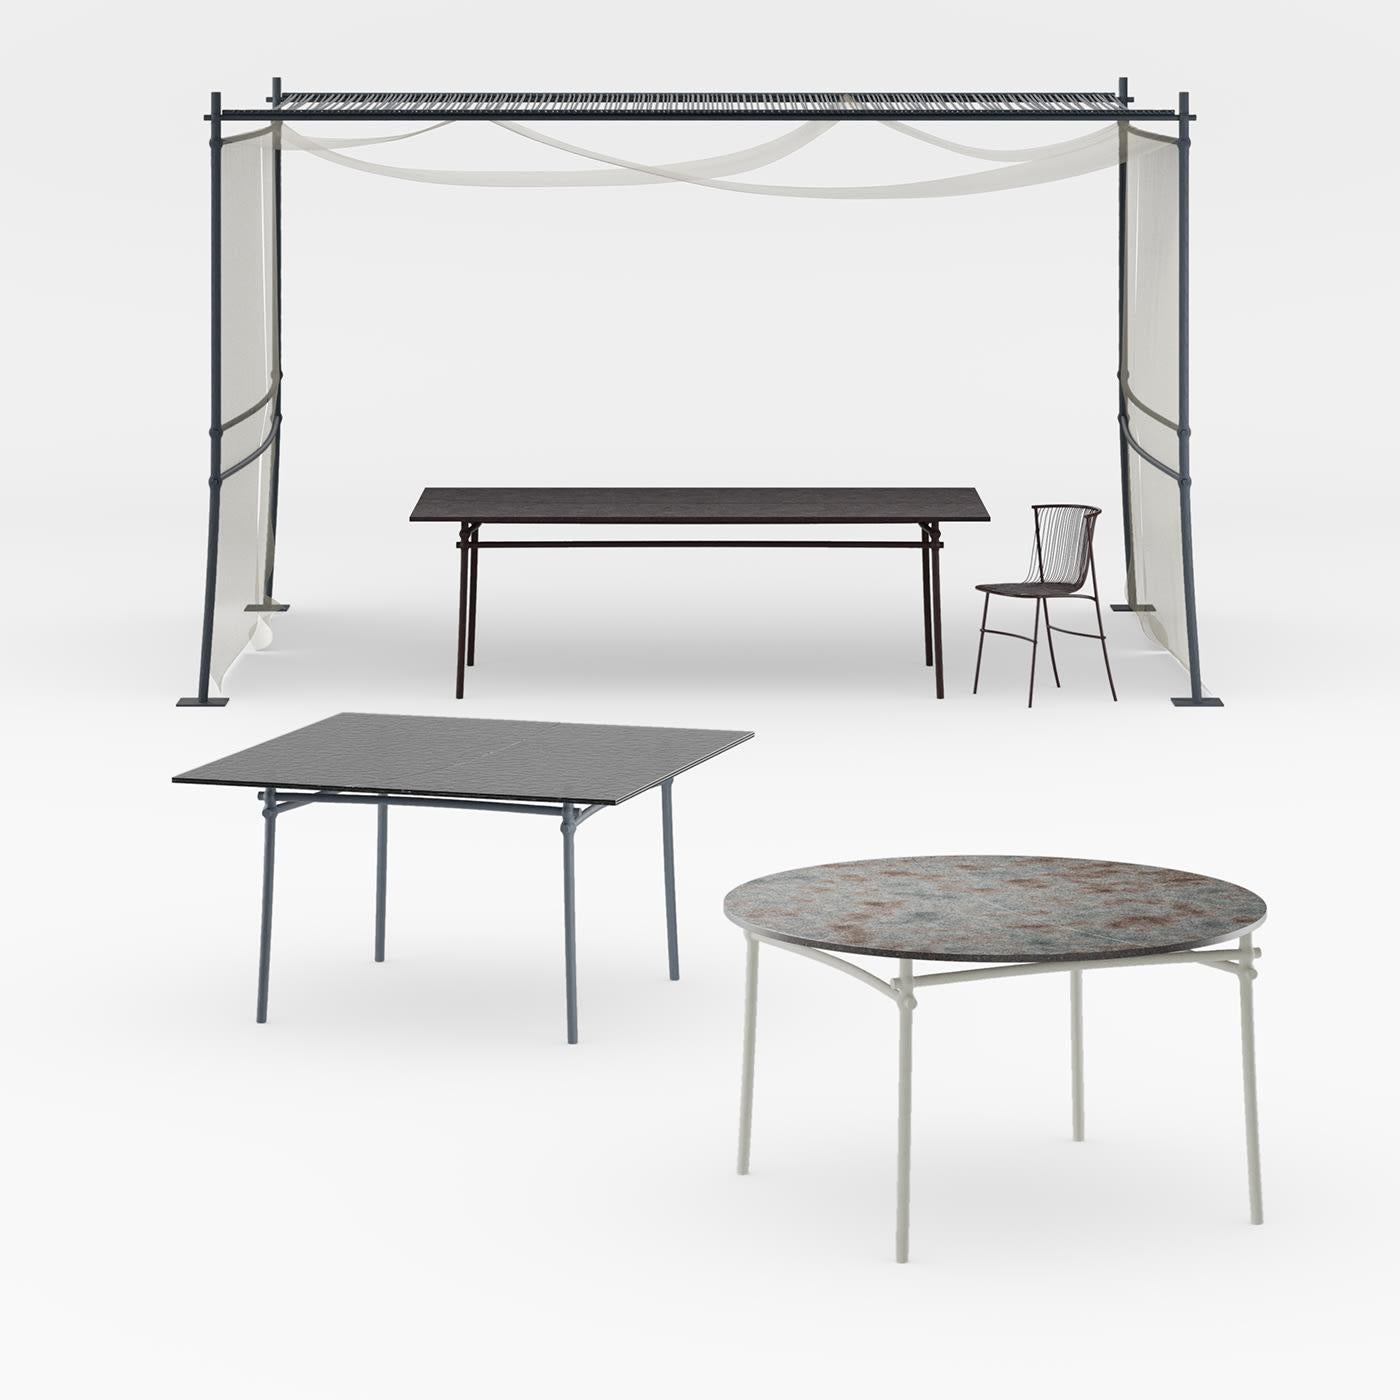 Exuding a timeless industrial-chic flair, this rectangular dining table will be ideally combined with the gazebo and other furniture from the Bambusae series. Designed in collaboration with Zanellato/Bortotto, it is handcrafted of lacquered and